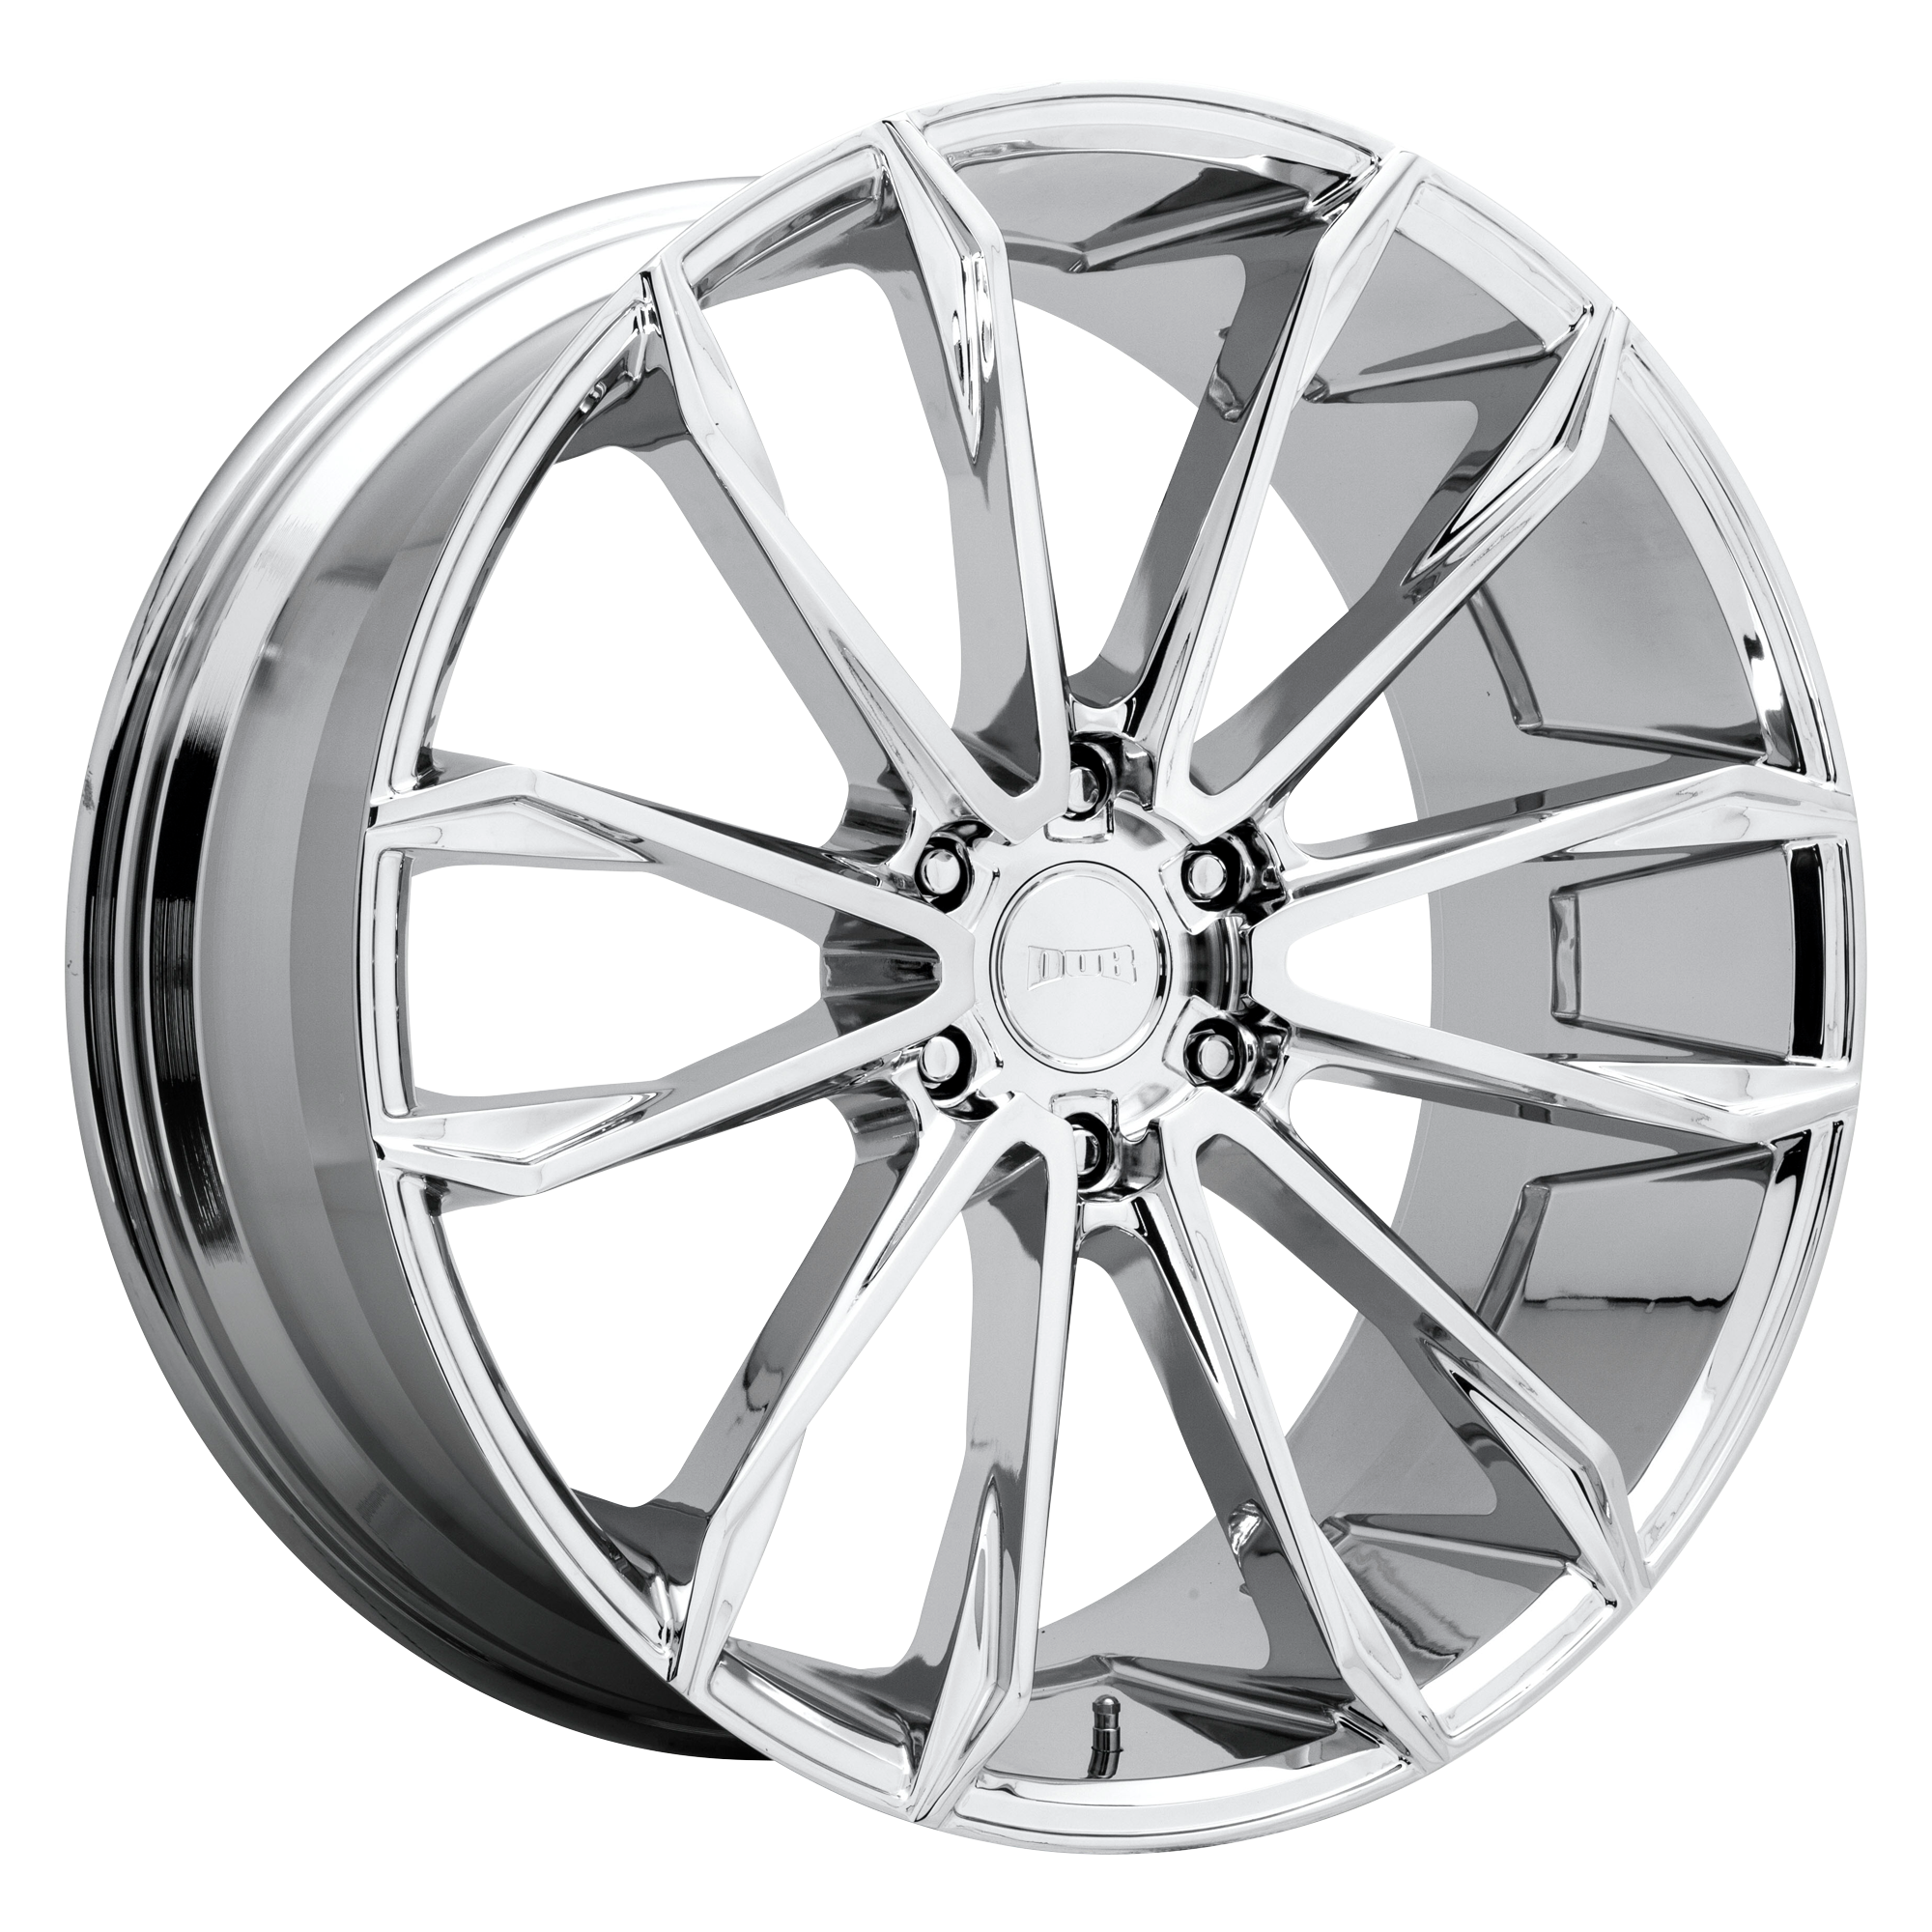 CLOUT 24x10 6x139.70 CHROME PLATED (30 mm) - Tires and Engine Performance